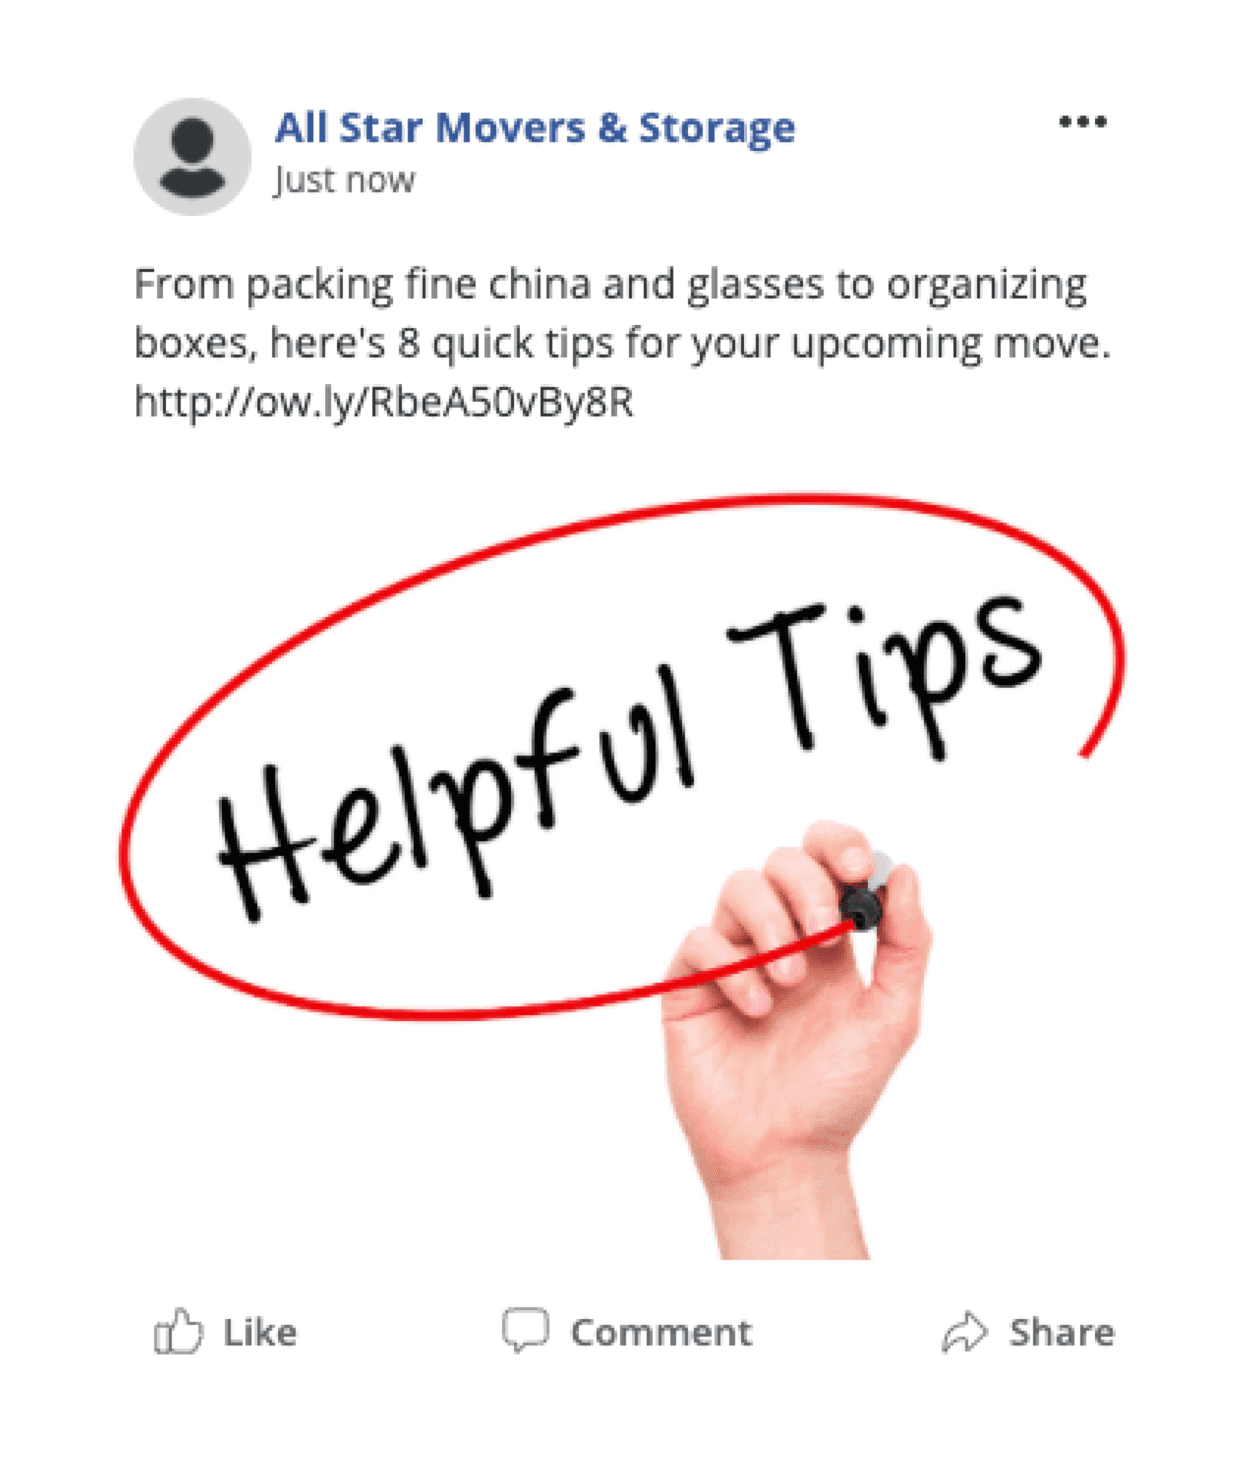 Moving company Facebook post